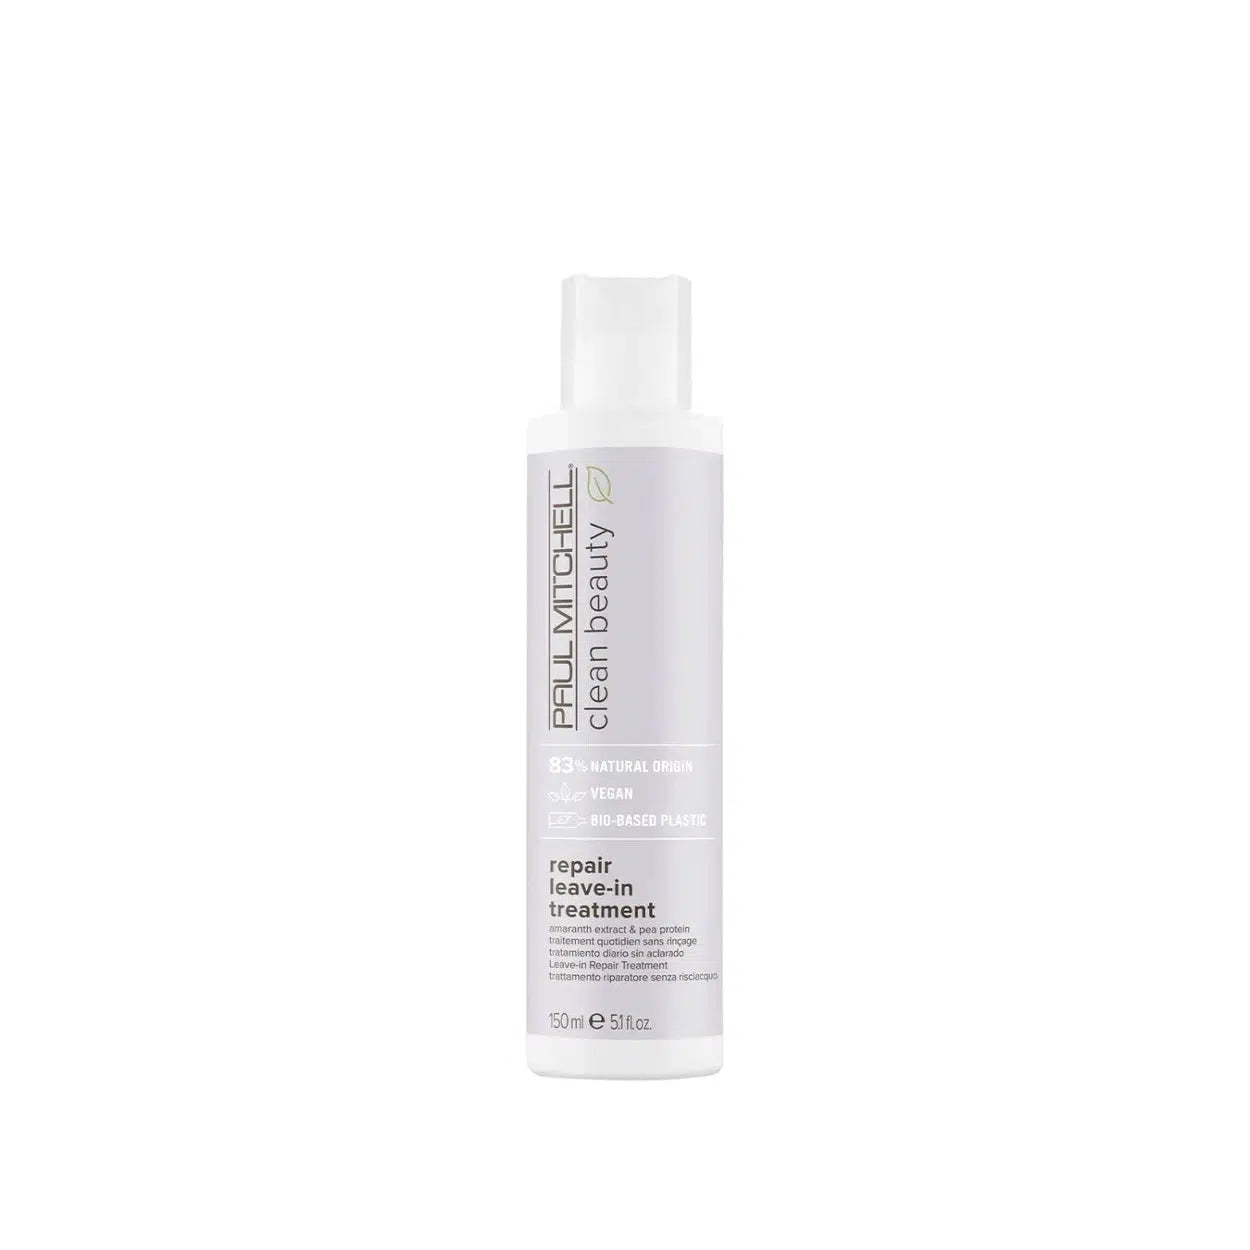 Paul Mitchell Clean Beauty Repair leave in treatment 150ml